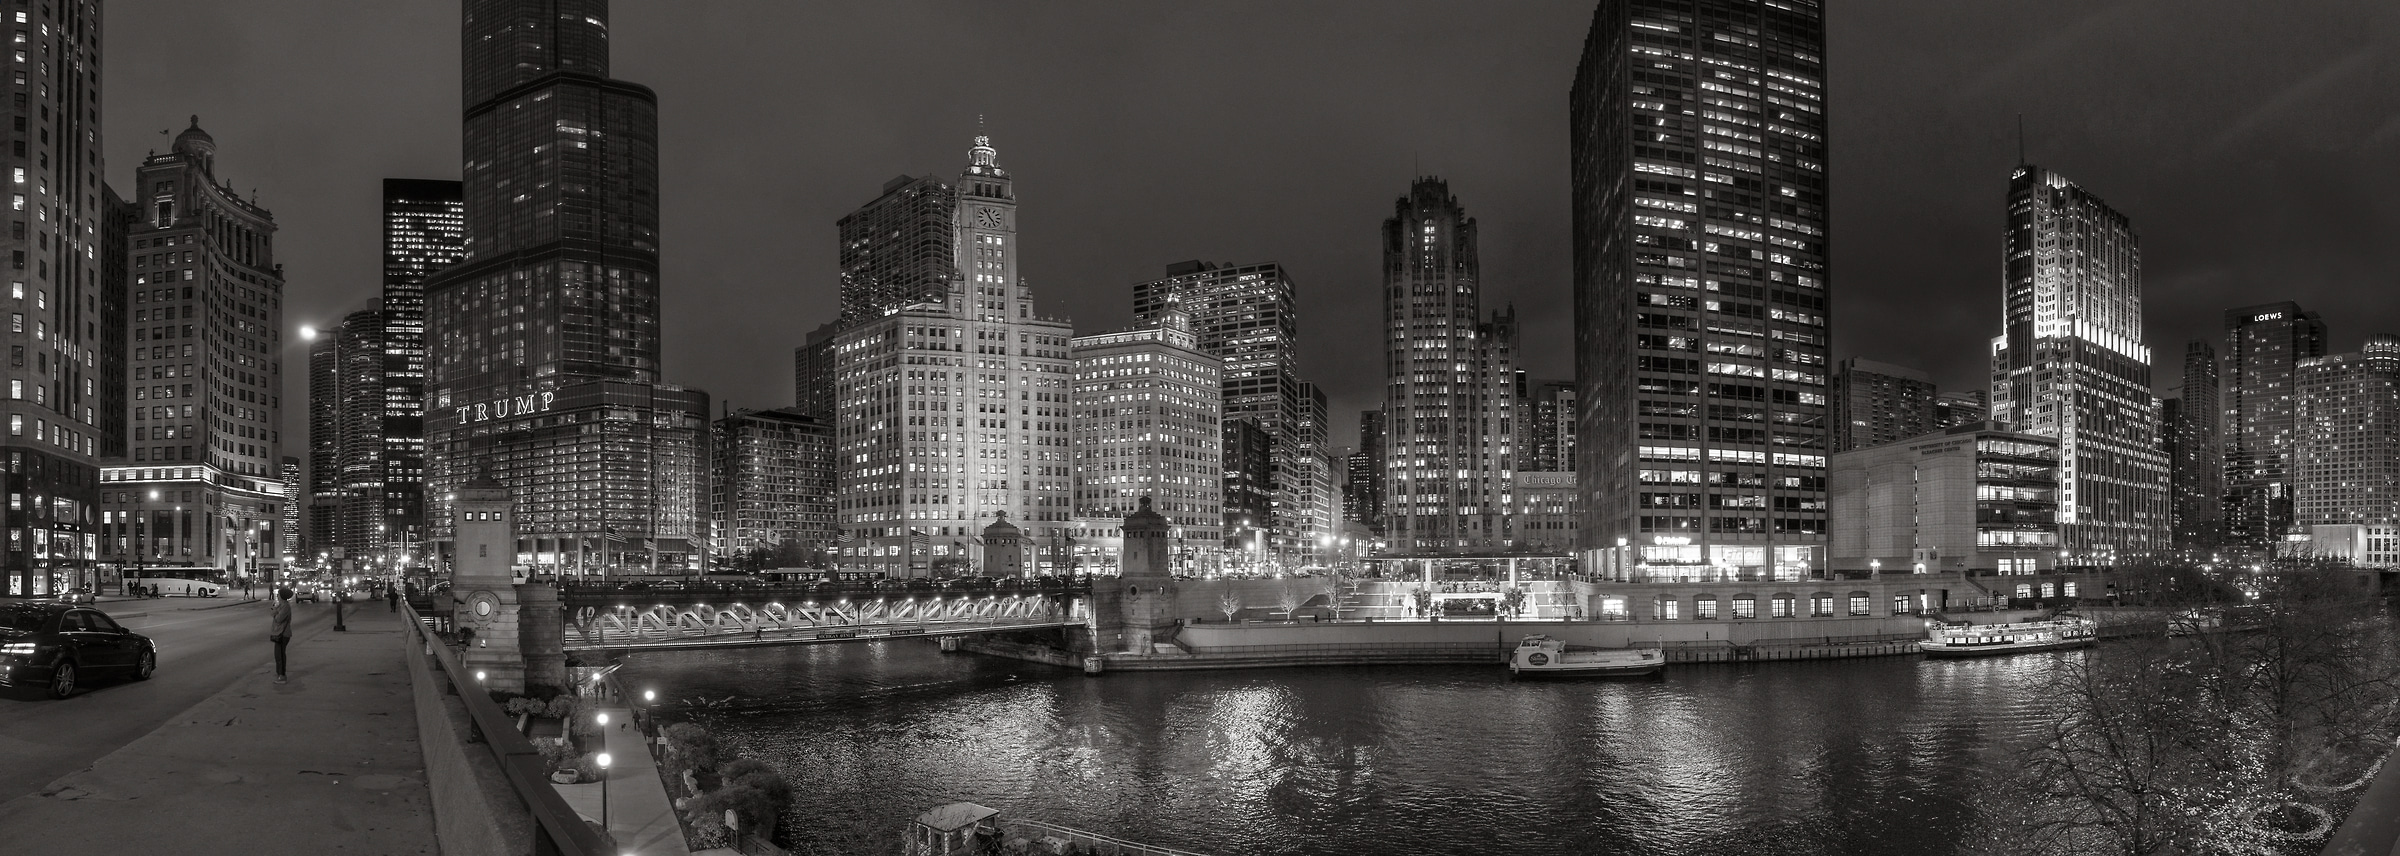 240 megapixels! A very high resolution, black & white VAST photo print of the Chicago River at night with the Chicago skyline; black & white cityscape photograph created by Peter Rodger in Chicago River, Michigan Avenue, Chicago